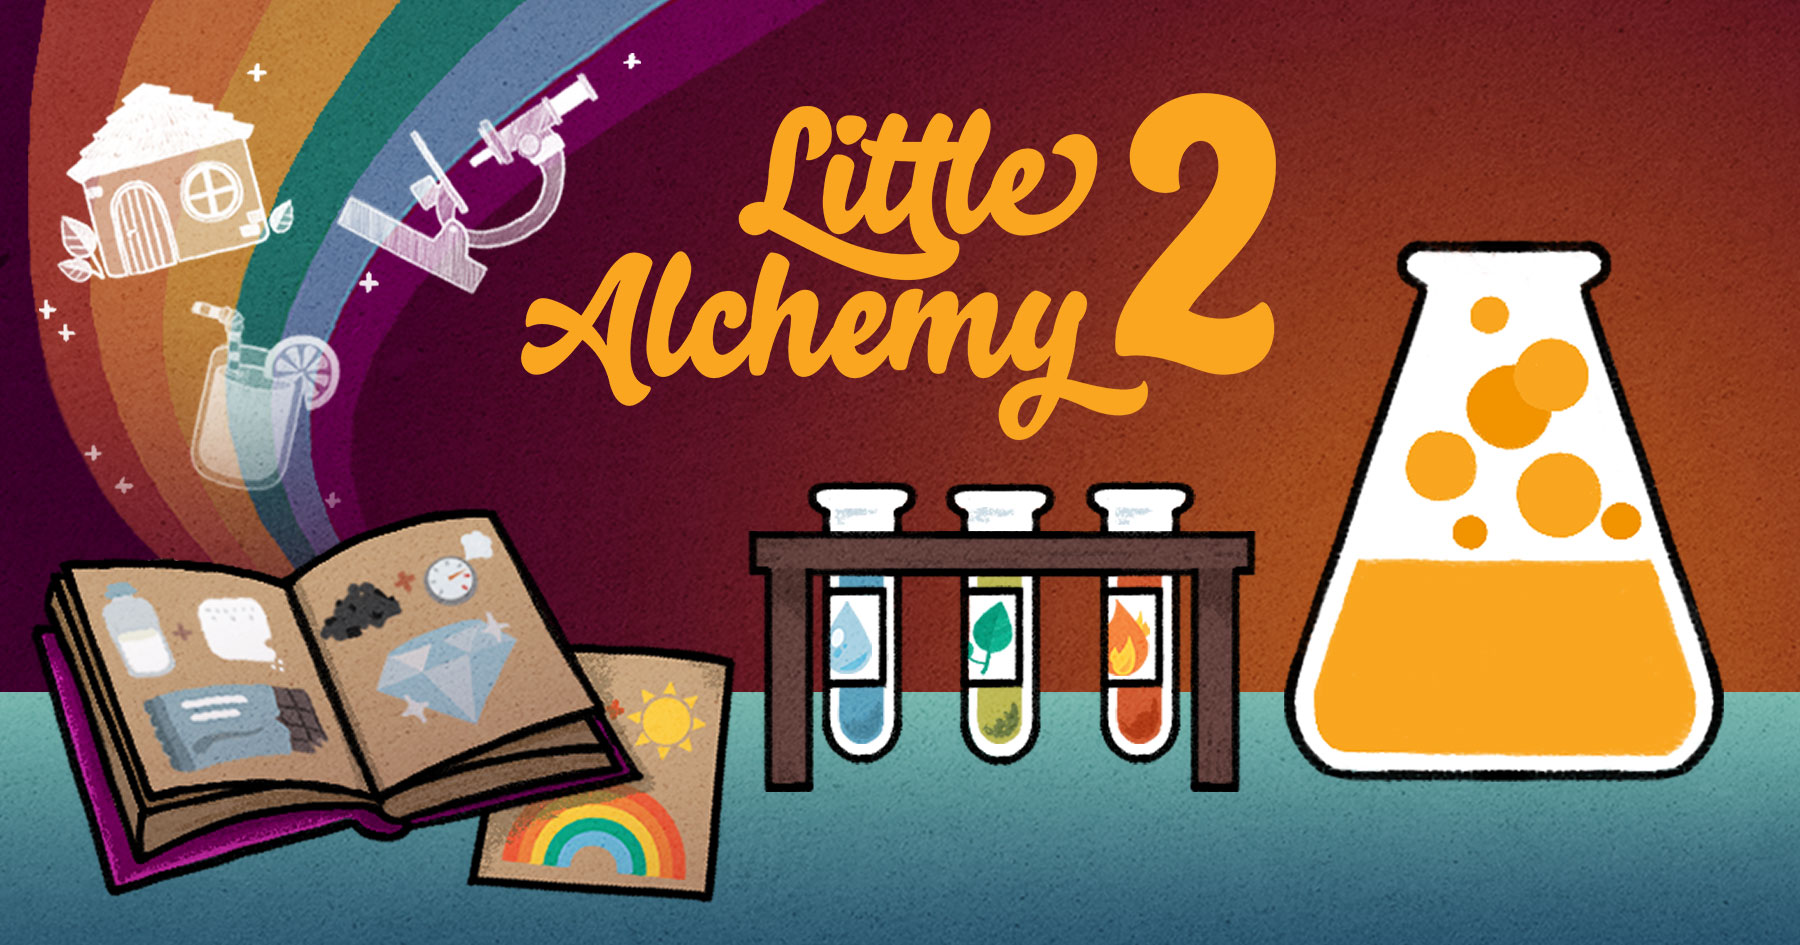 how to make lightsaber in little alchemy 2